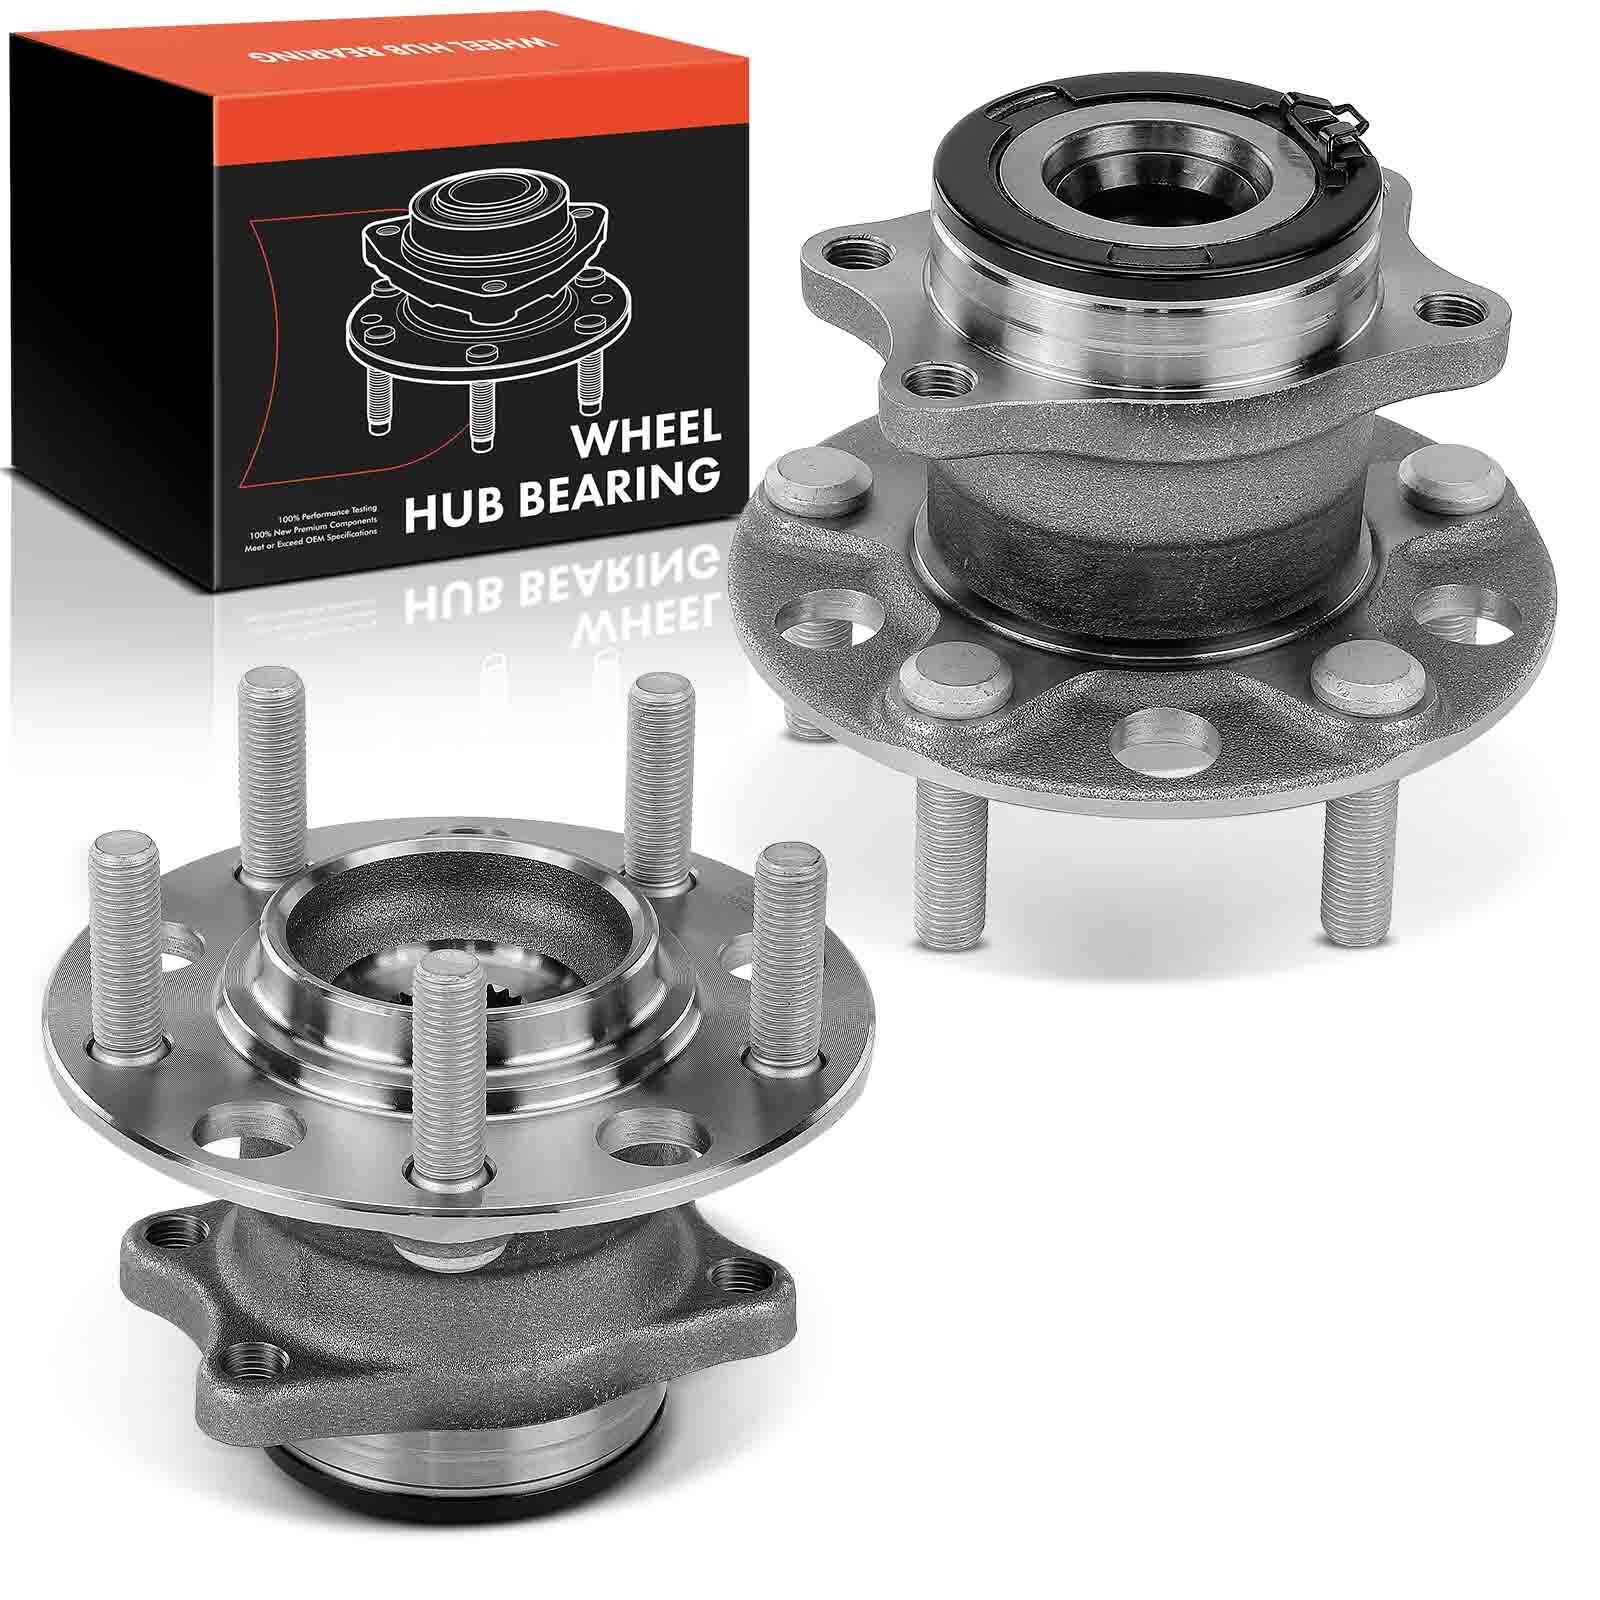 2x Rear Wheel Hub Bearing Assembly for Jeep Compass Patriot 07-17 Dodge Caliber